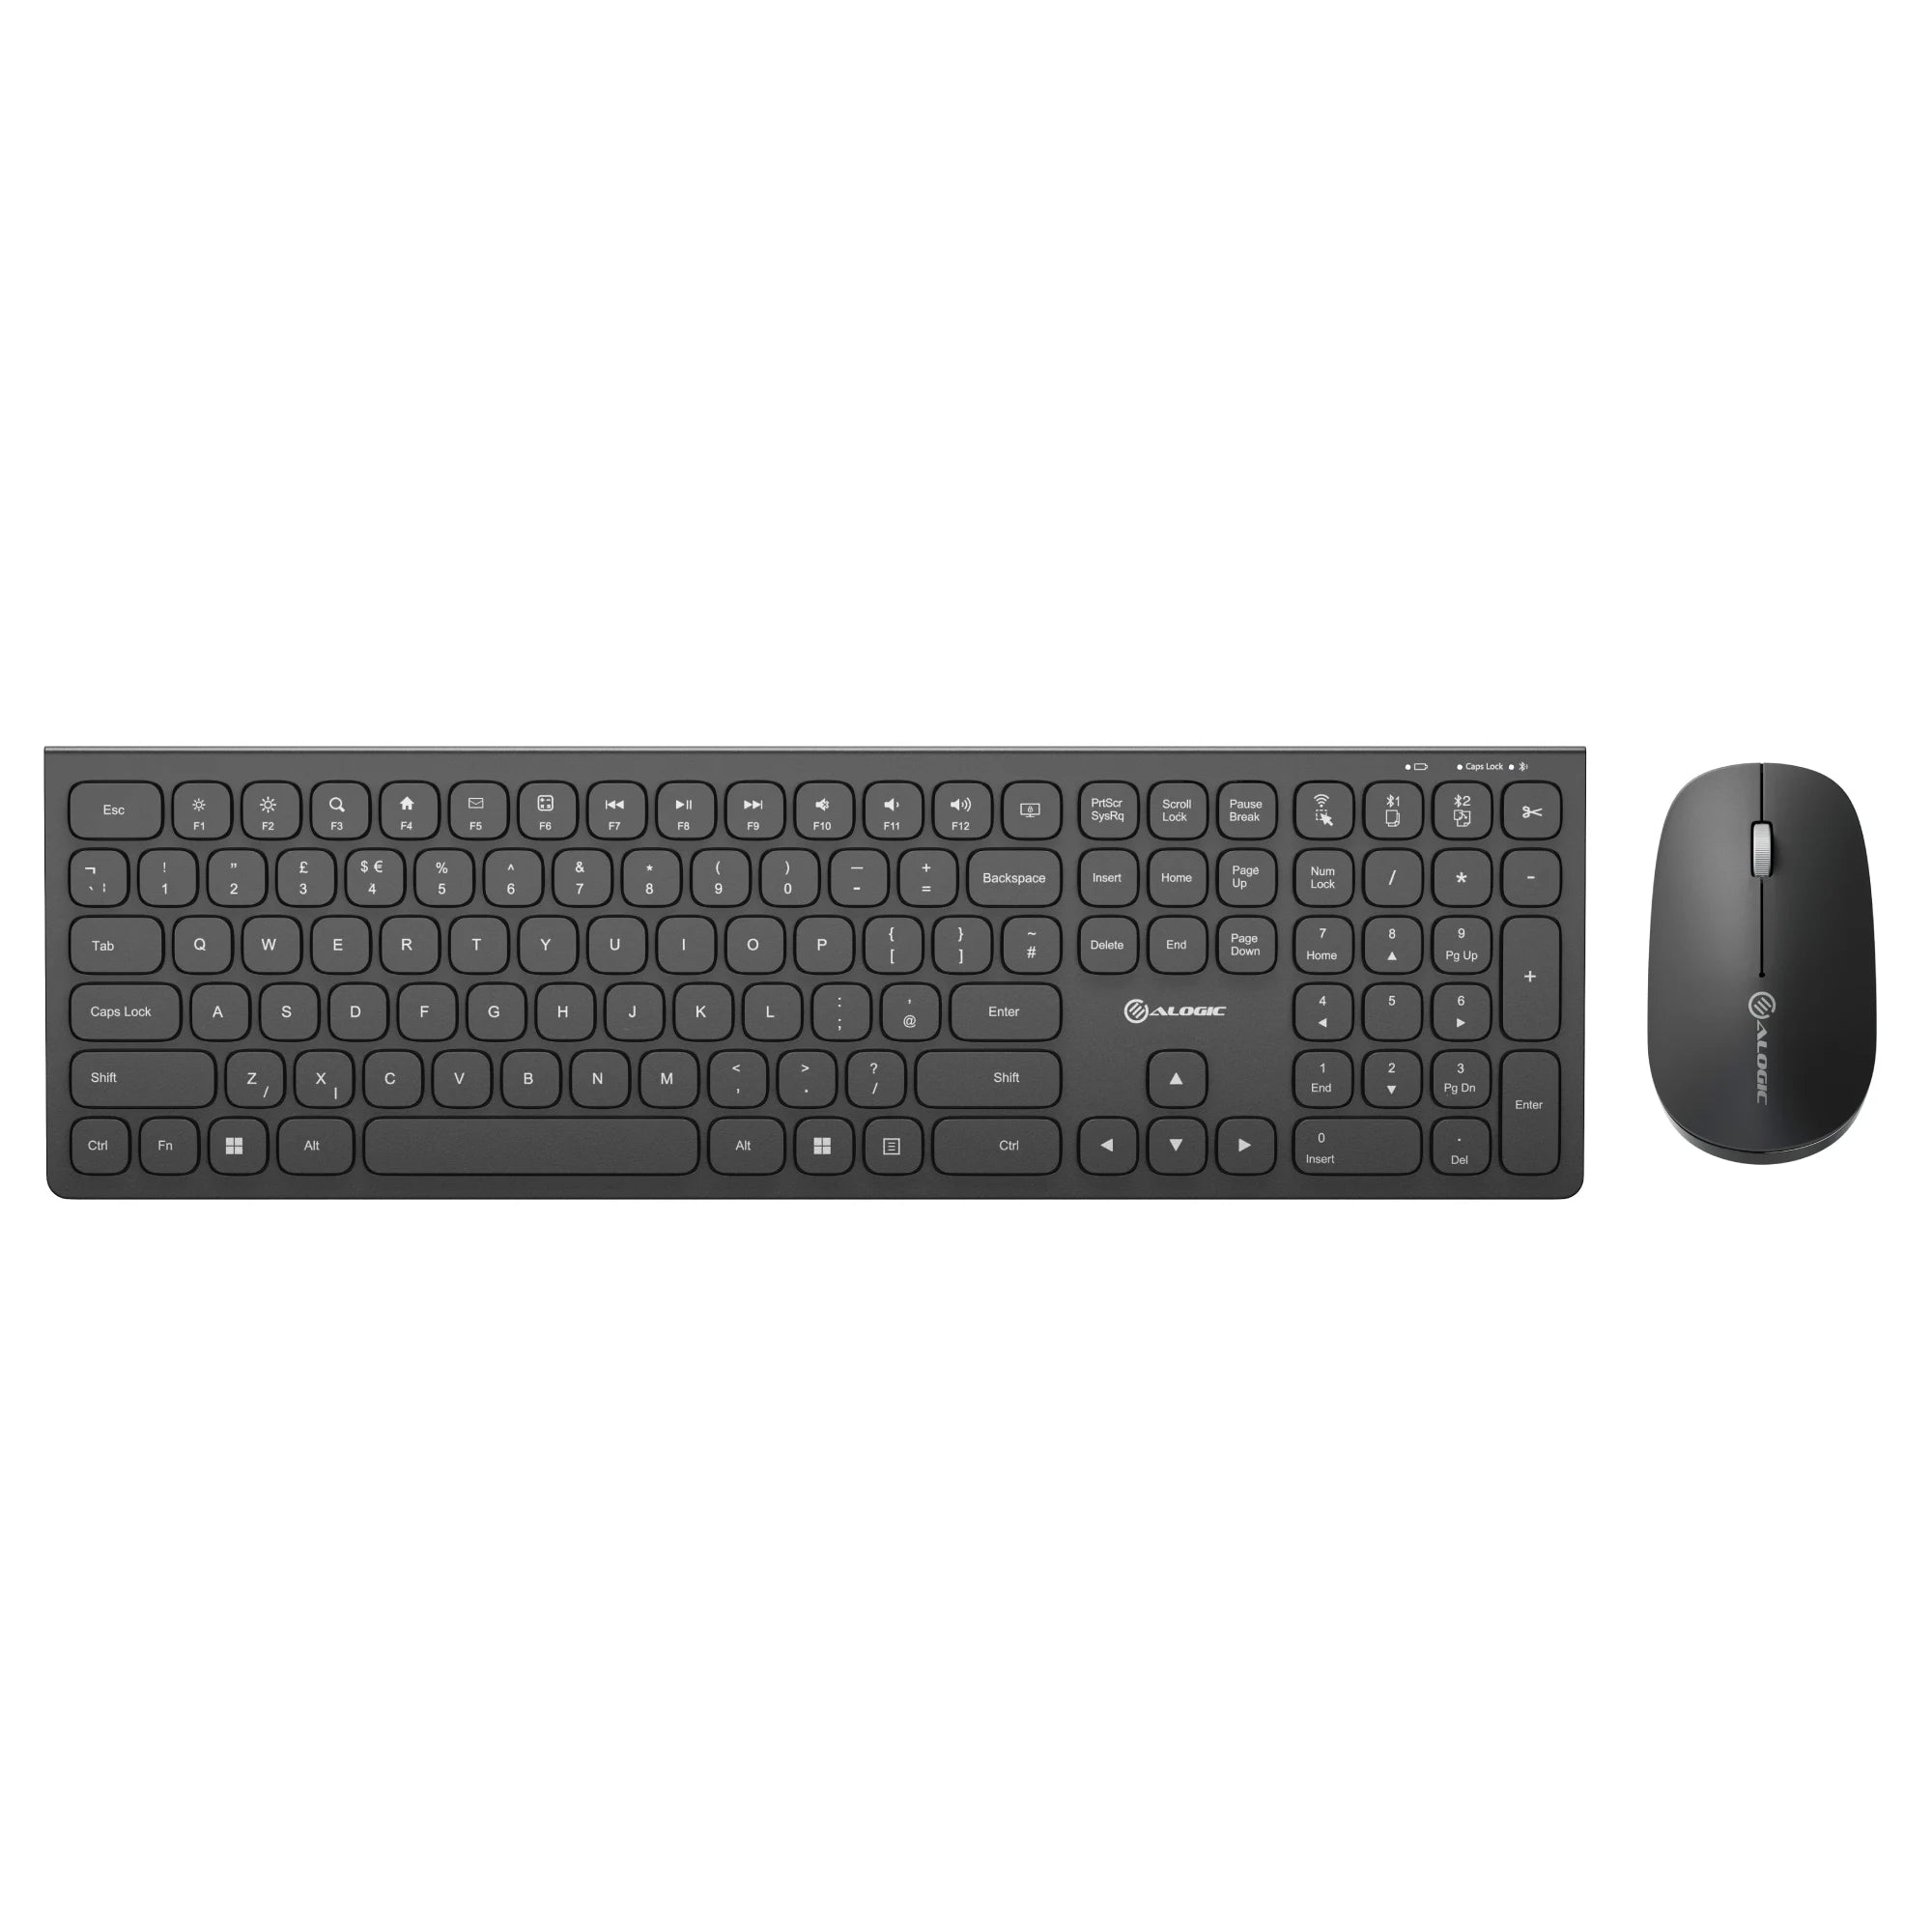 Echelon USB-C Rechargeable Wireless Mouse and Keyboard for Windows